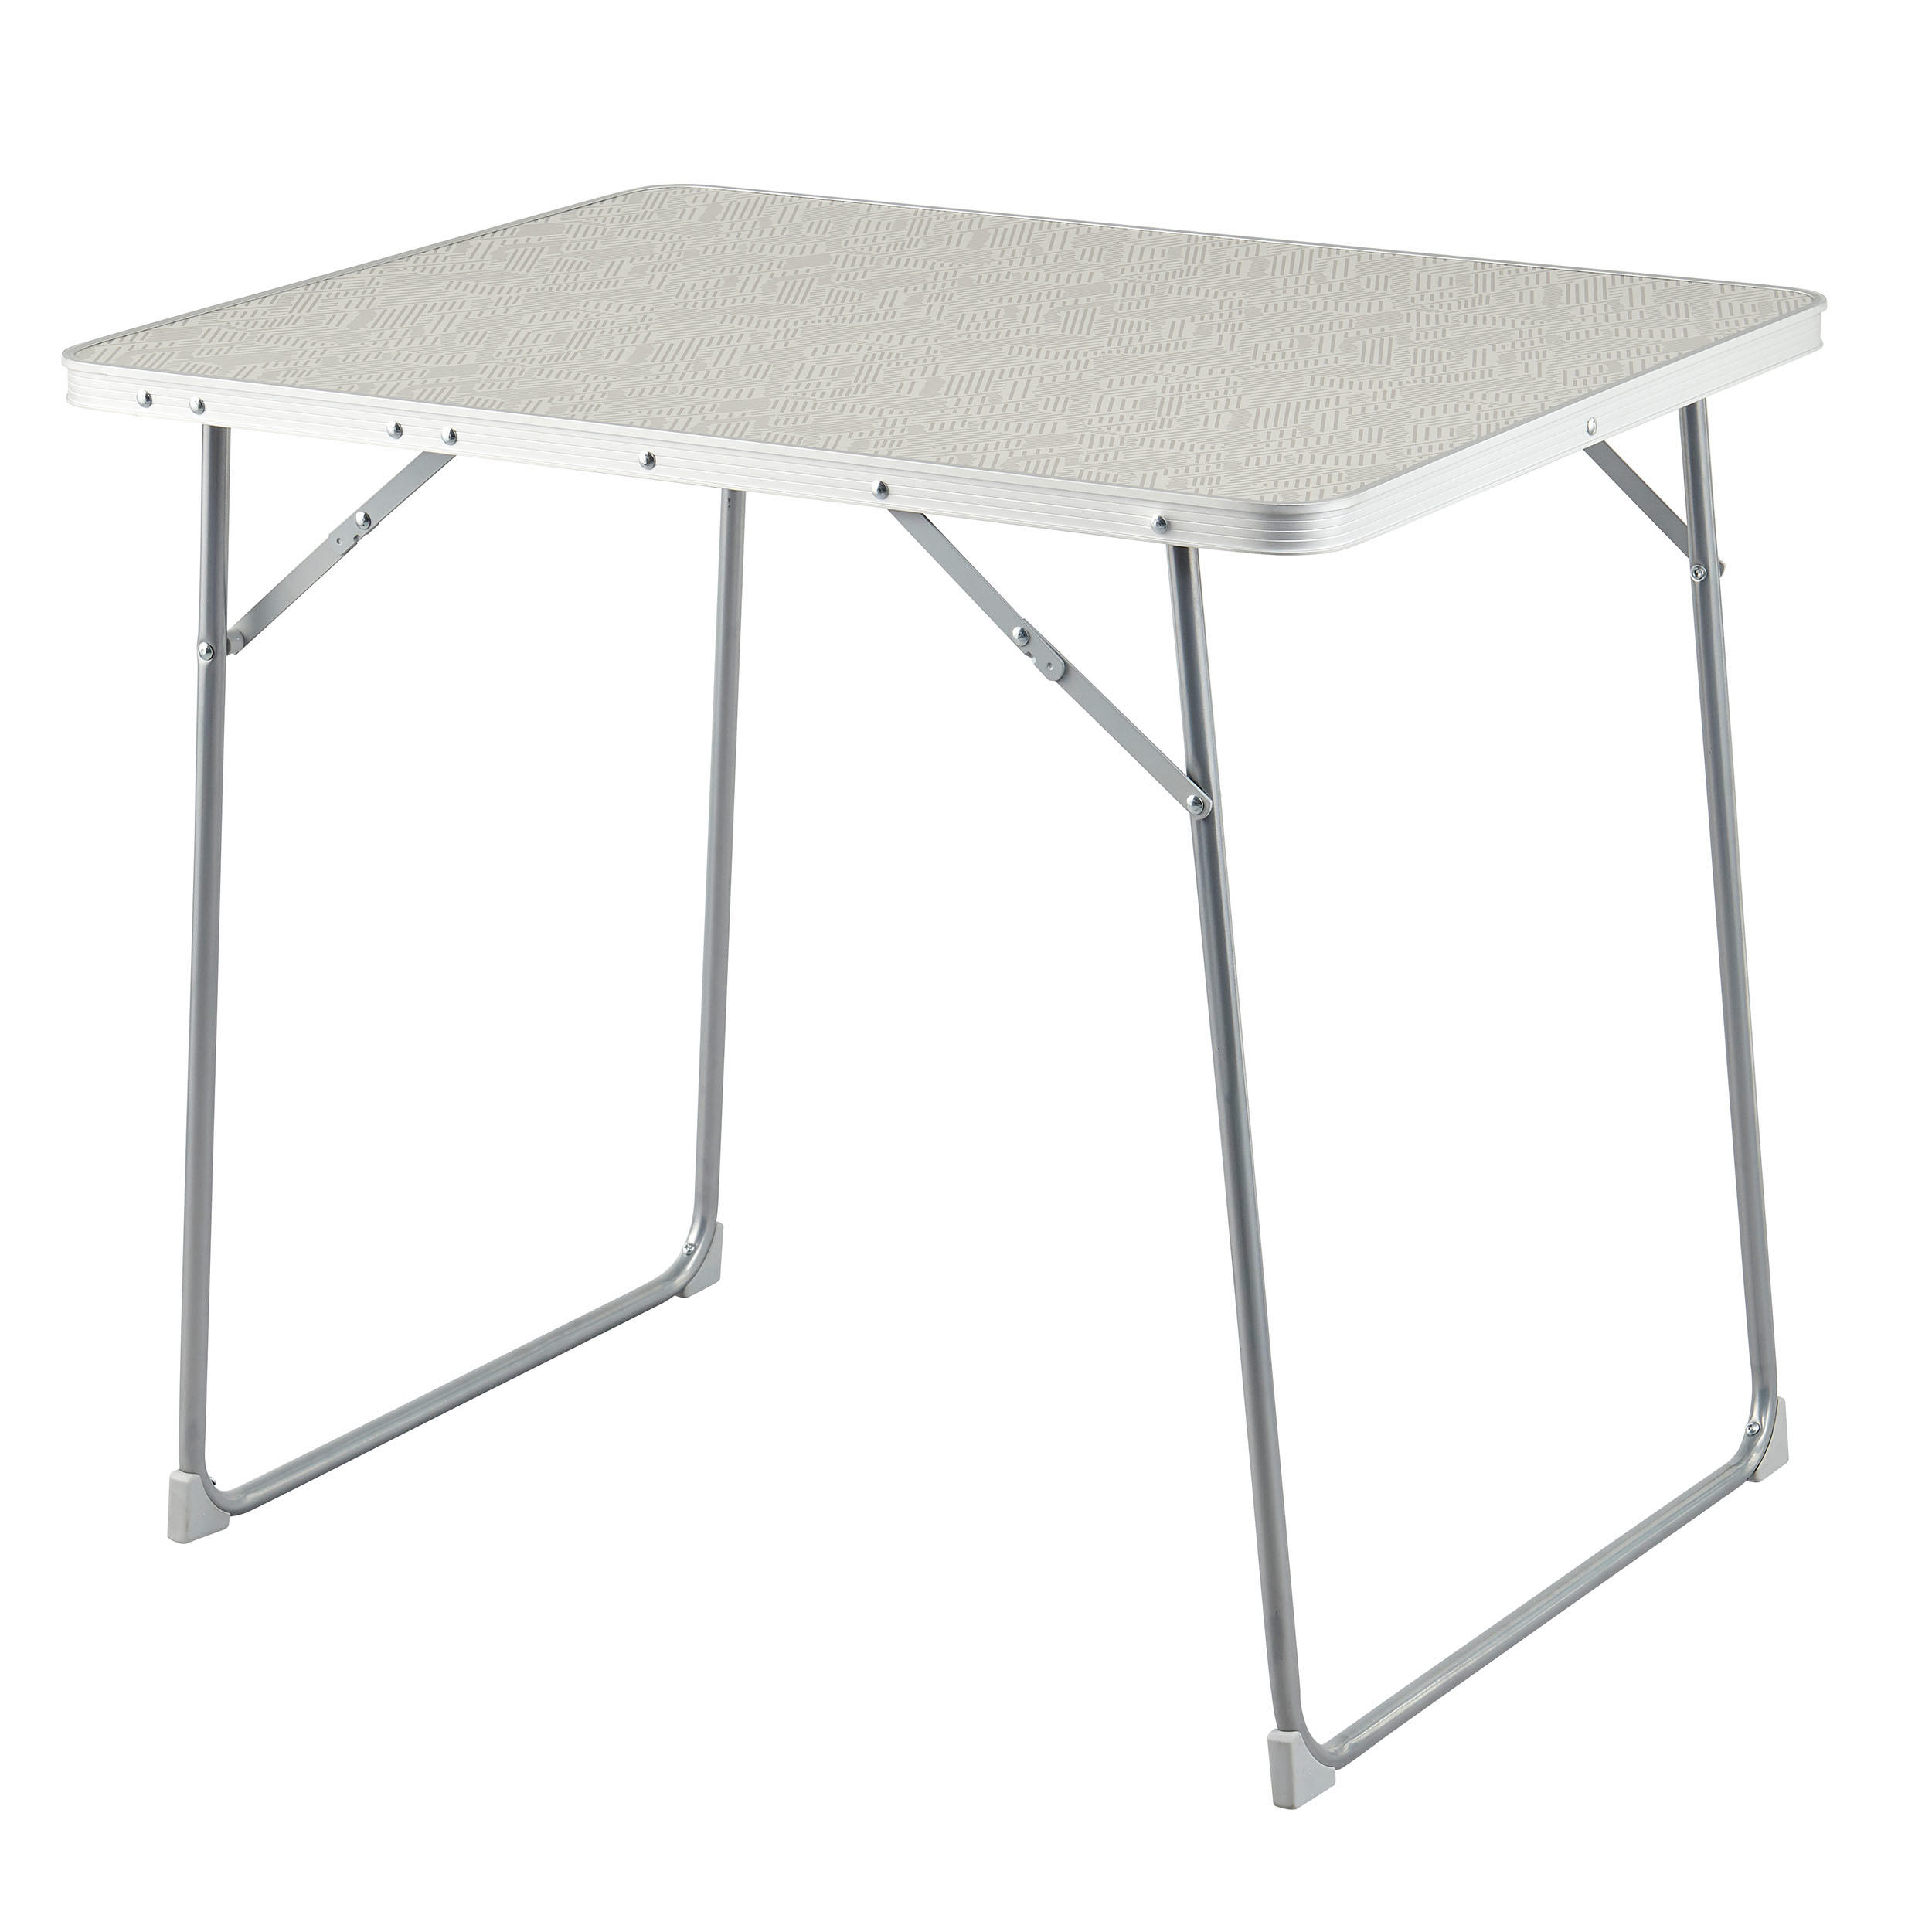 CAMPING TABLE (FOLDABLE) 2-4 PERSON